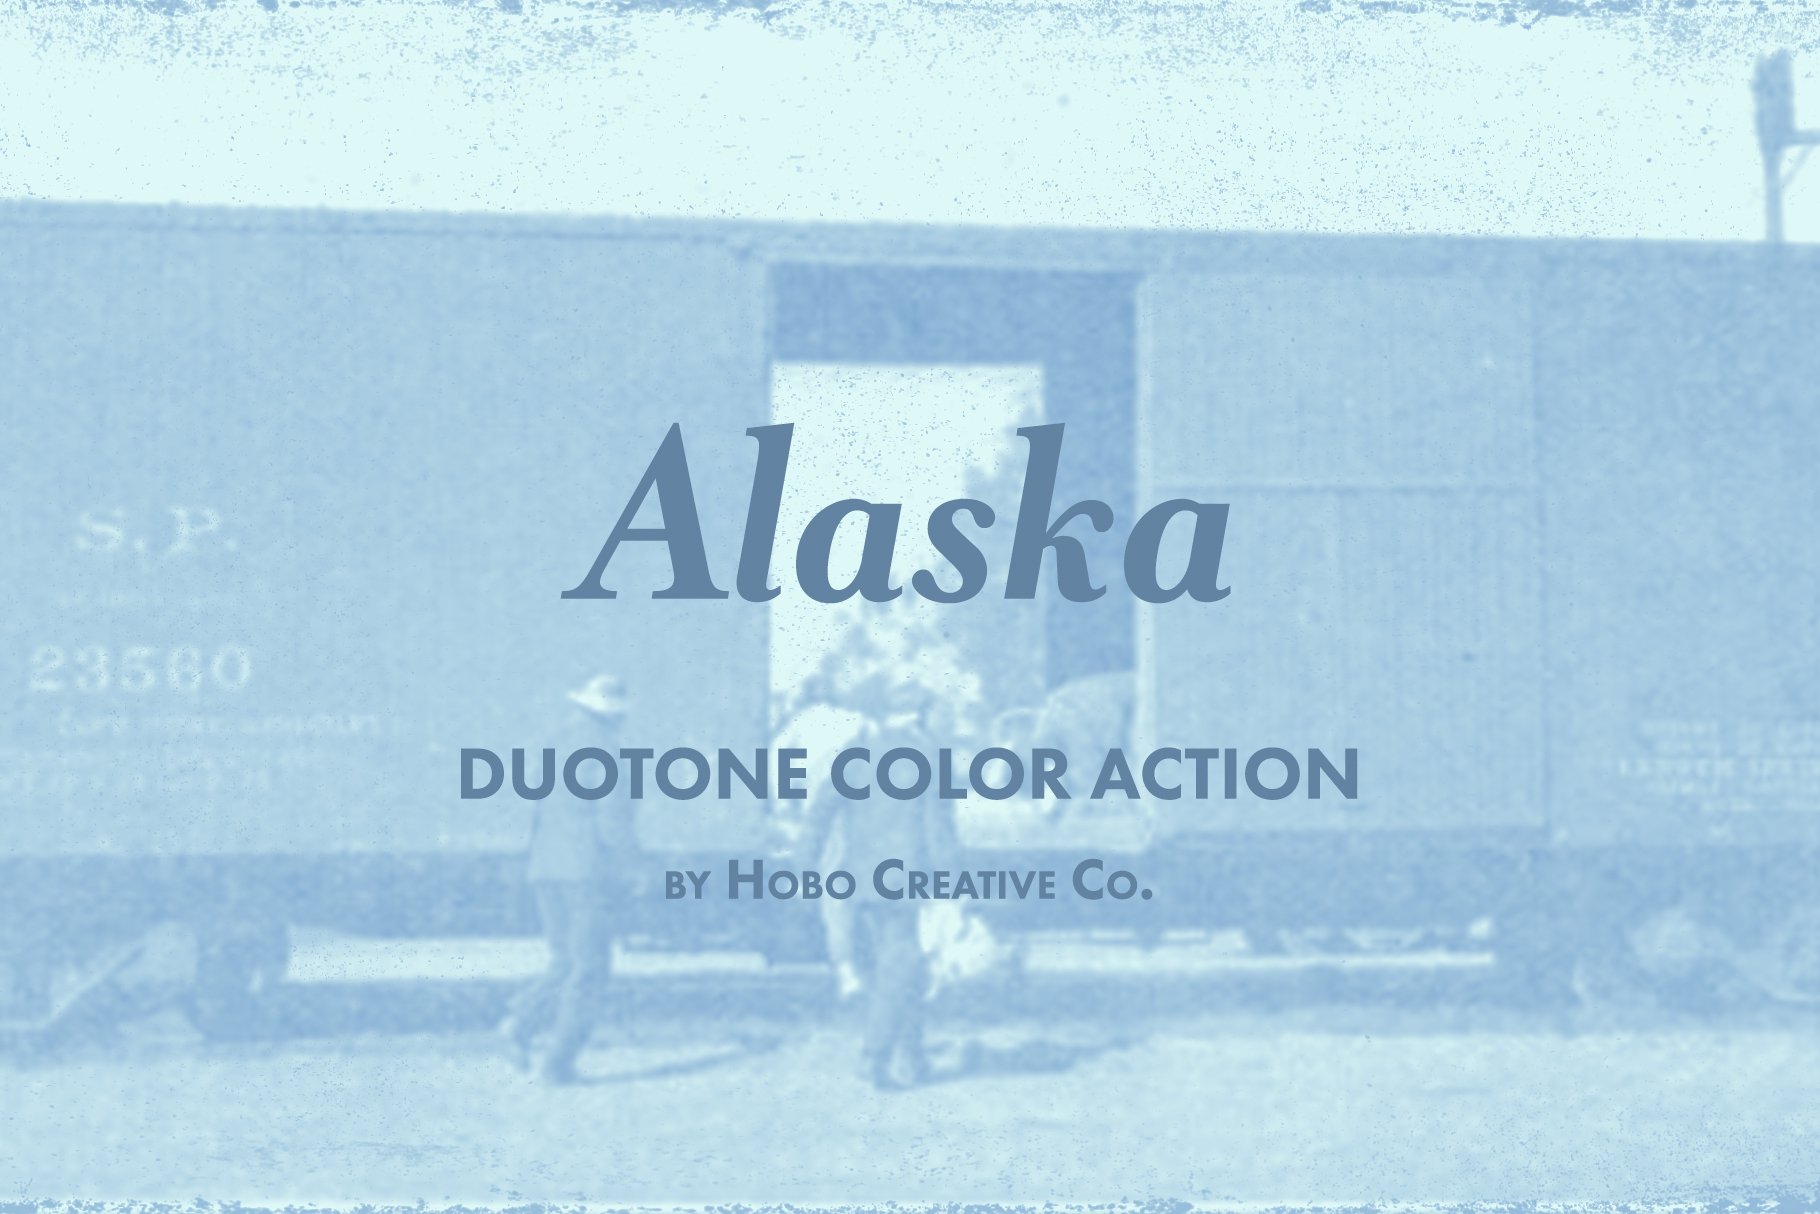 Duotone Color Actionspreview image.